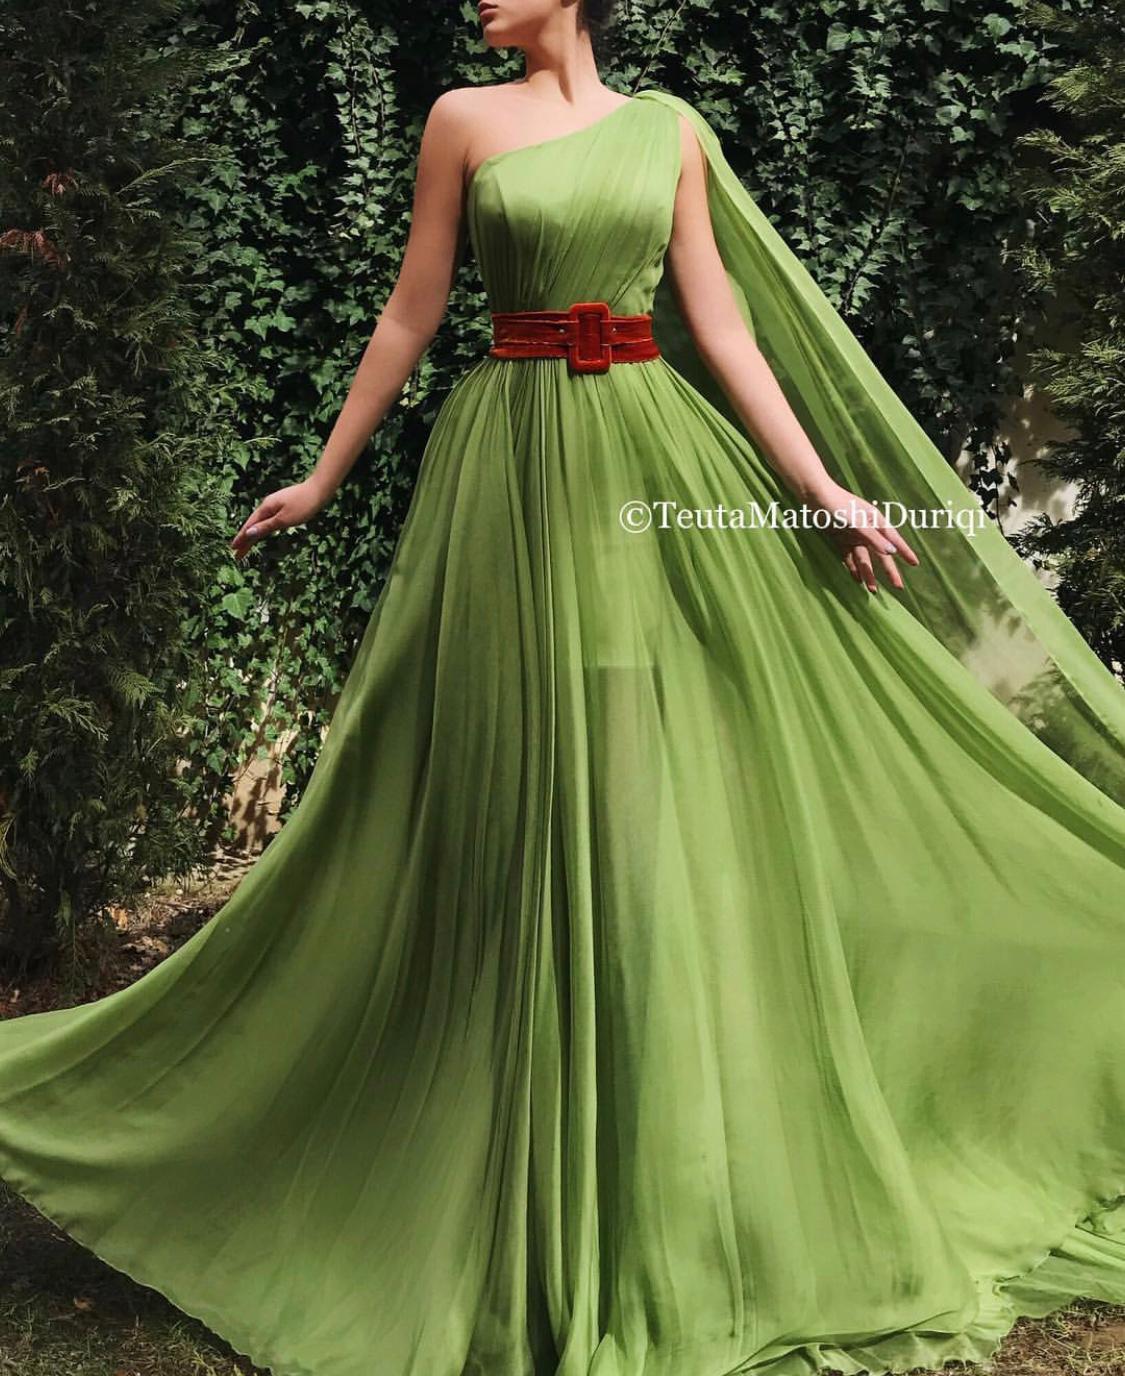 Green A-Line dress with belt and one shoulder cape sleeve